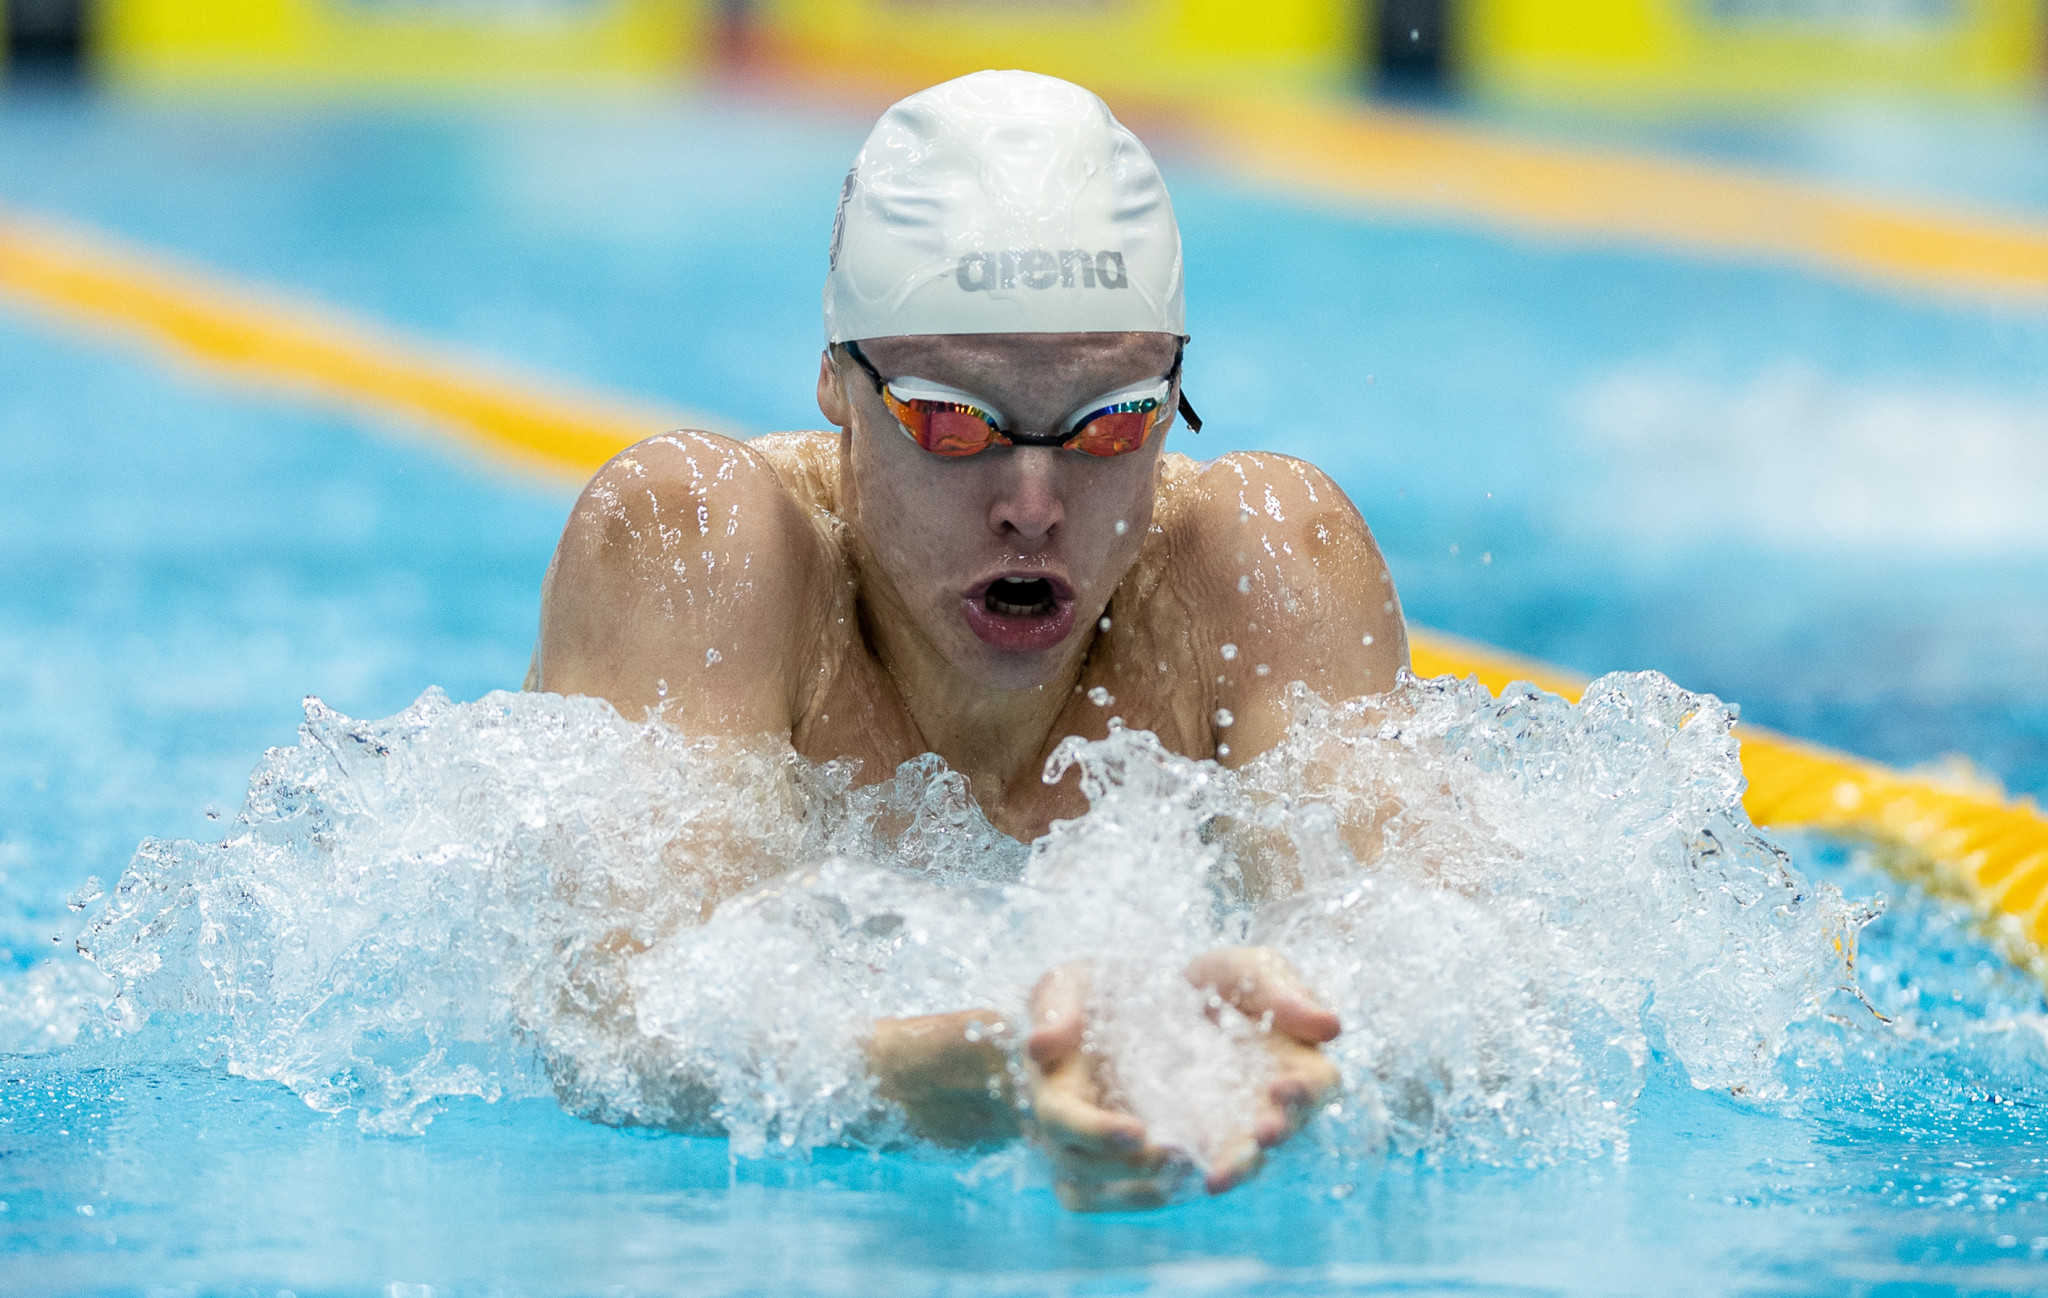 Sates scores two golds on final day of Berlin leg of Swimming World Cup